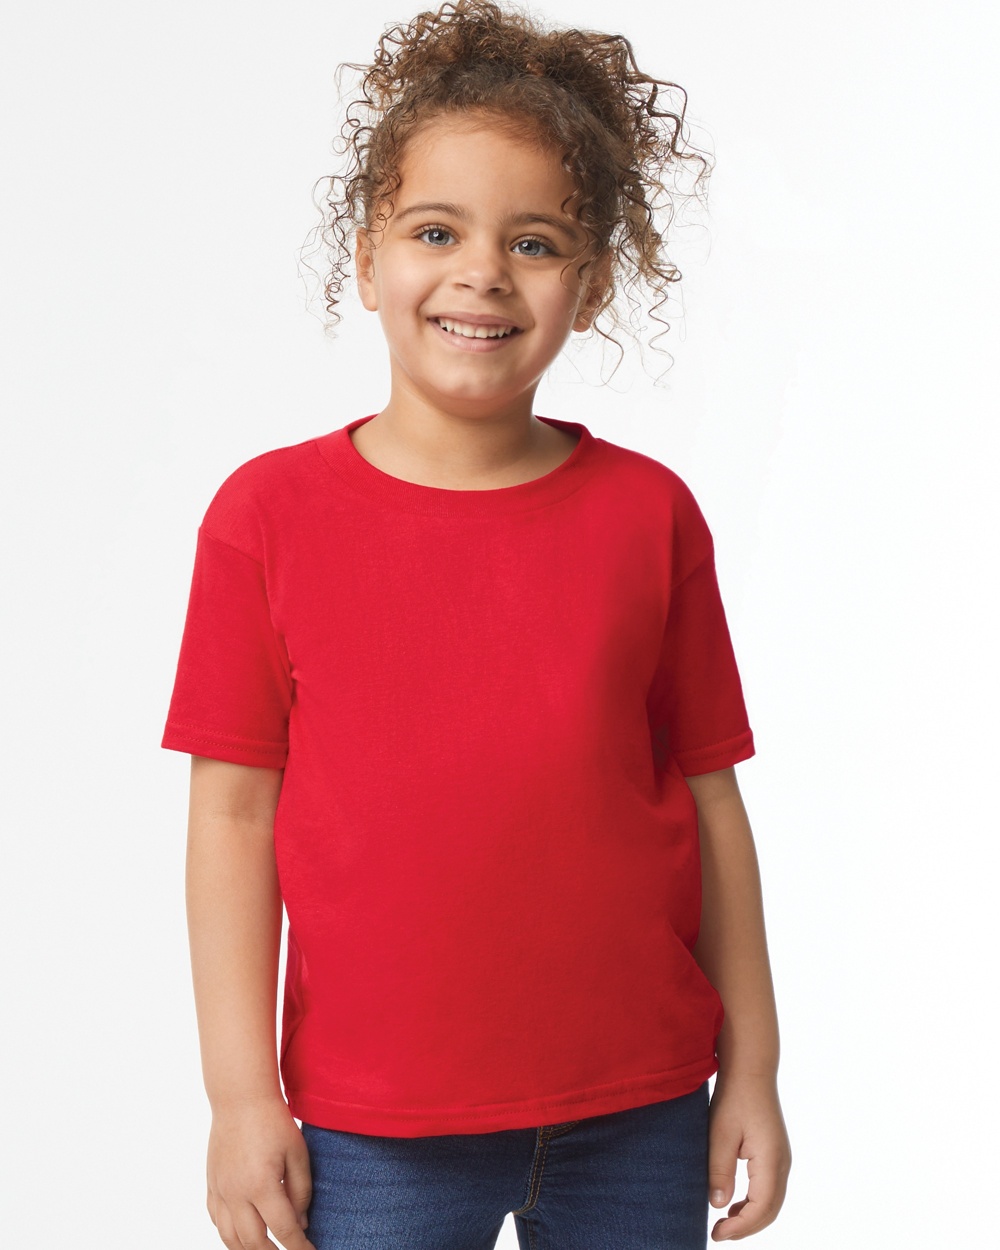 GD820 - Heavy Cotton™ Toddler T-Shirt - One Stop